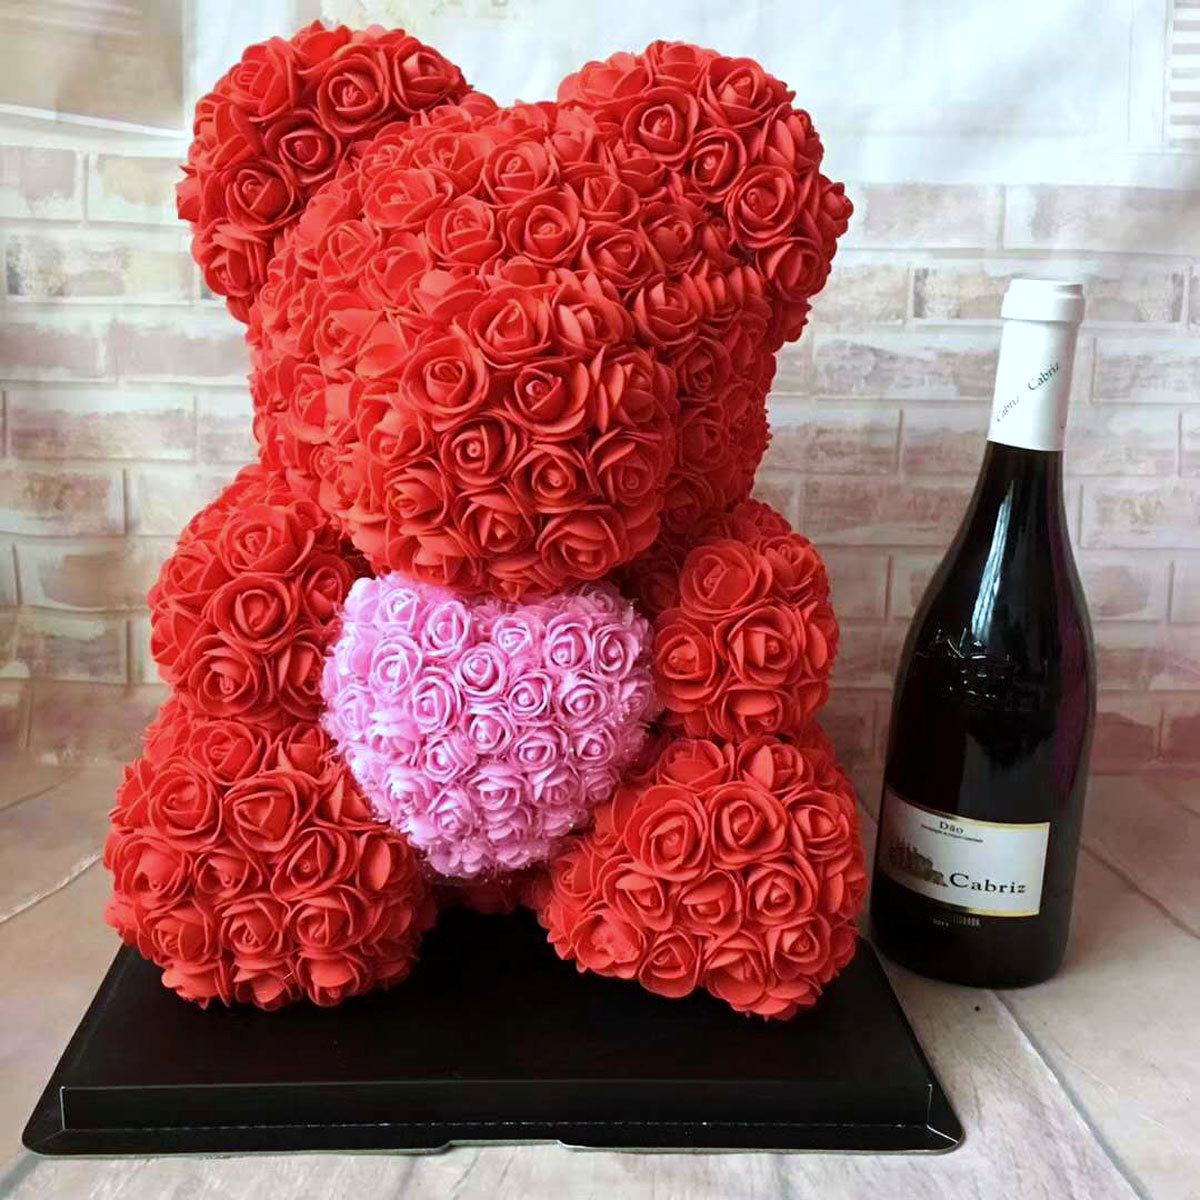 Valentines Gift Ideas For Her
 9 Wine Valentines Day Gift Ideas for Her